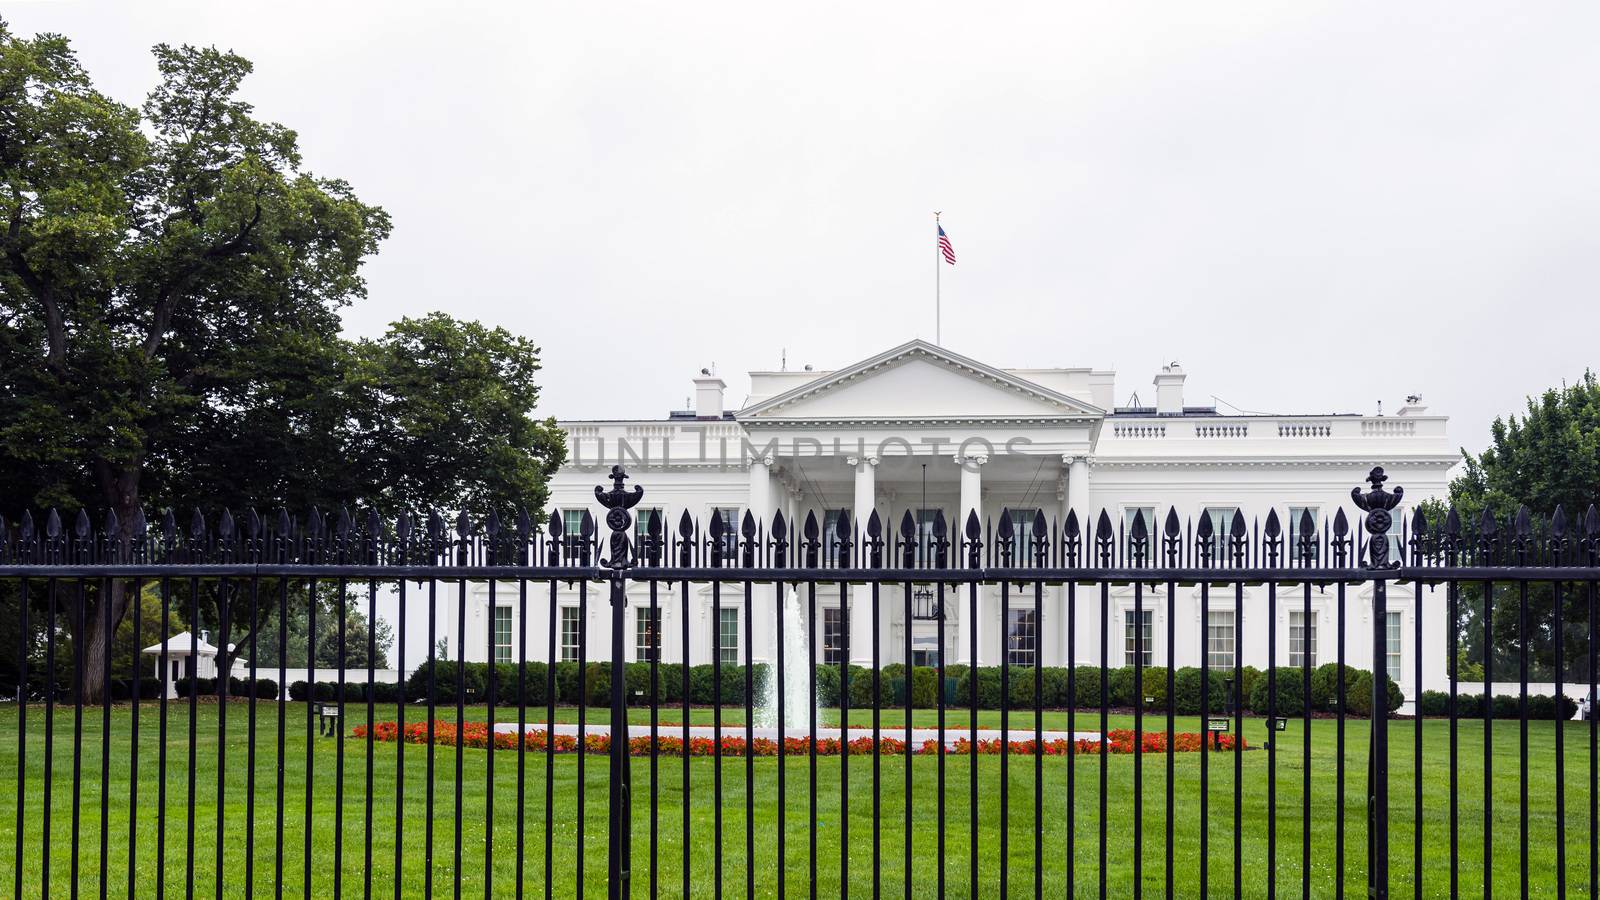 The east side of the White House with fountain, iron fence and red flowers in the foreground.